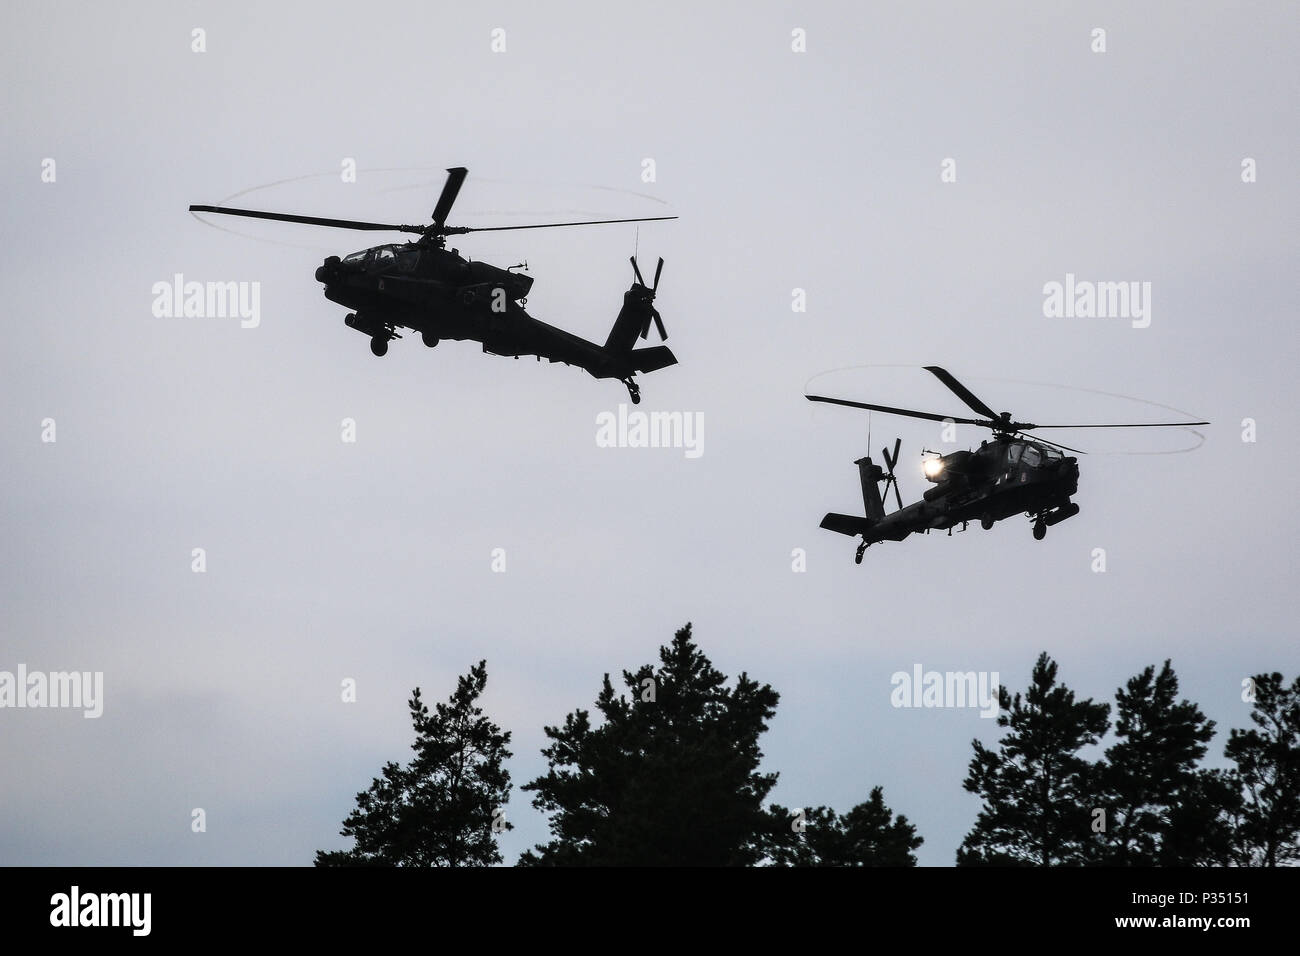 U.S. Army AH-64 Apache helicopters with Battle Group Poland, provide aerial support during a multinational training event for exercise Puma 2 with Battle Group Poland at Bemowo Piskie Training Area, Poland on June 14, 2018 as part of Saber Strike 18. This year's exercise, which runs from June 3-15, tests allies and partners from 19 countries on their ability work together to deter aggression in the region and improve each unit's ability to perform their designated mission. (U.S. Army photo by Spc. Hubert D. Delany III /22nd Mobile Public Affairs Detachment)  Stock Photo